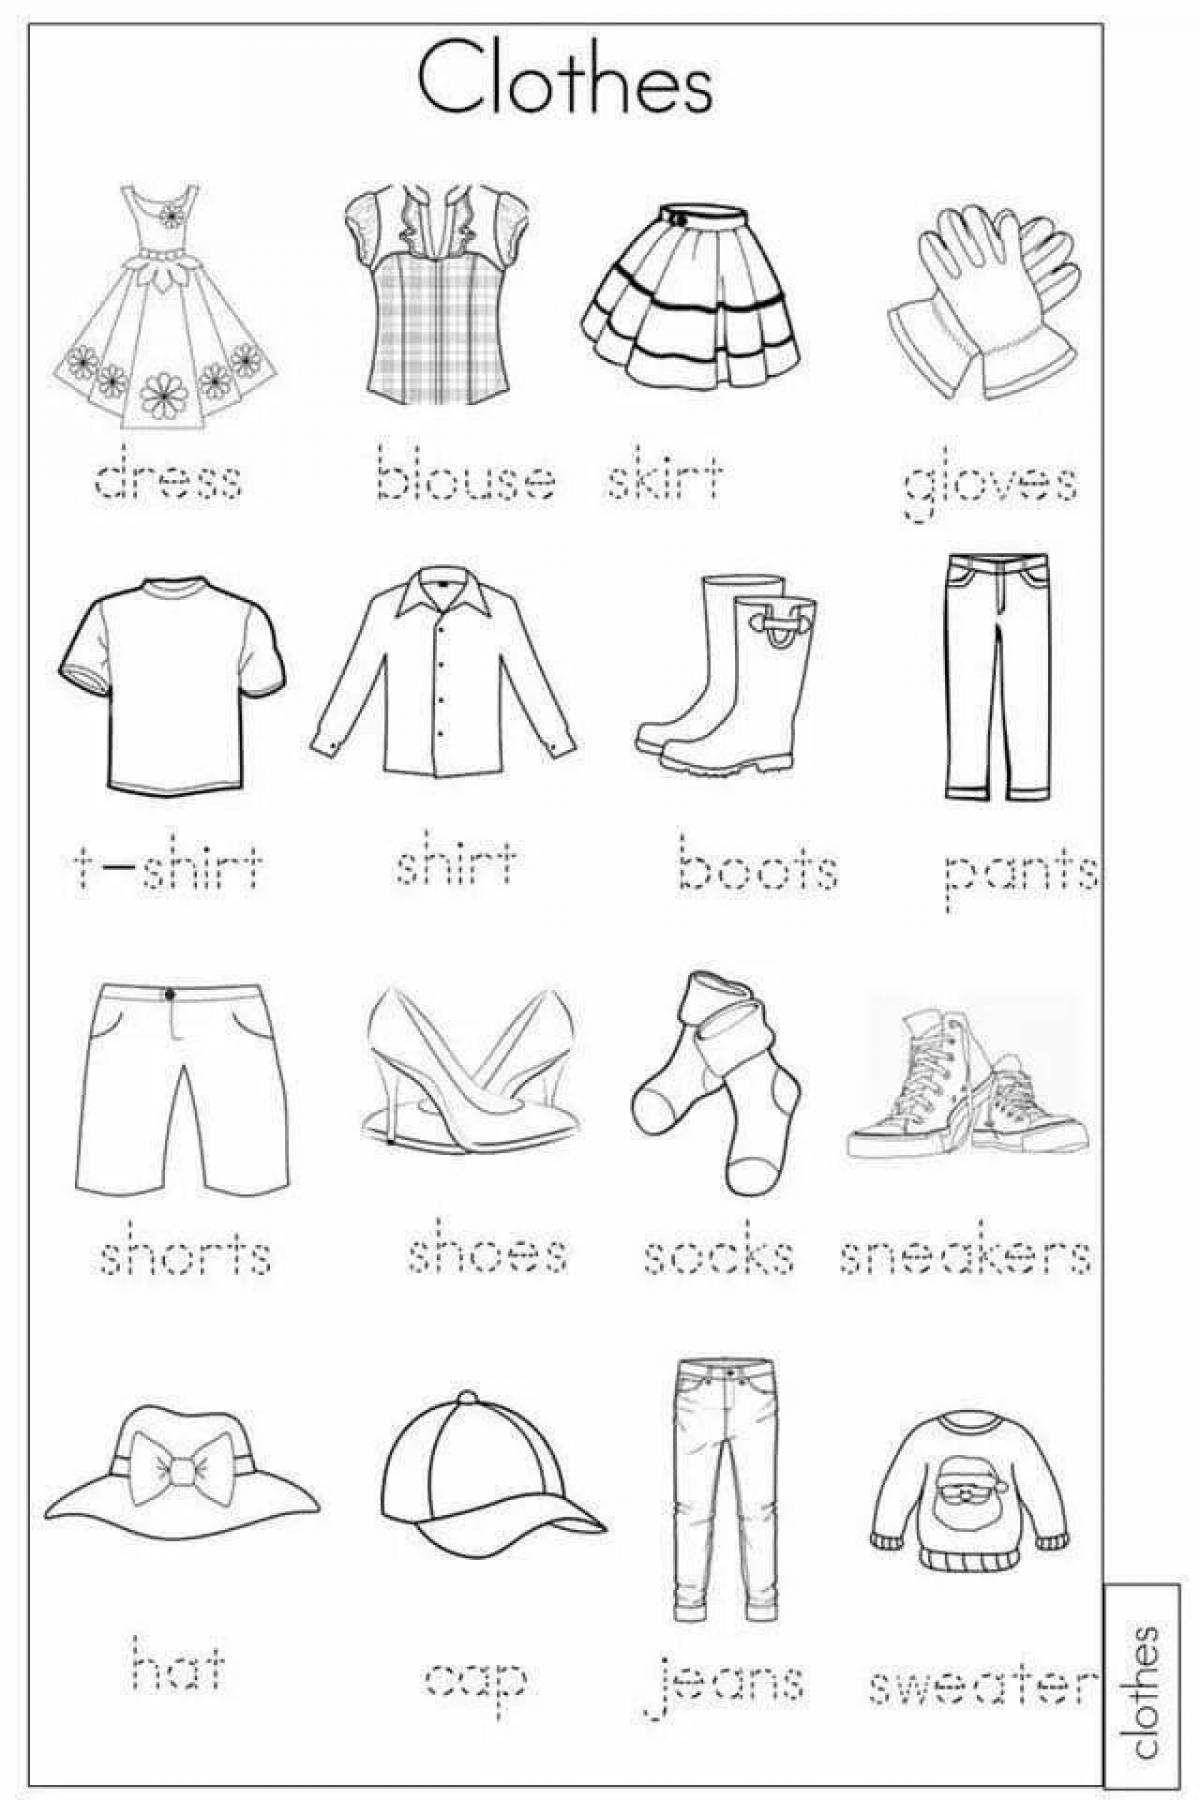 English for kids clothes #14